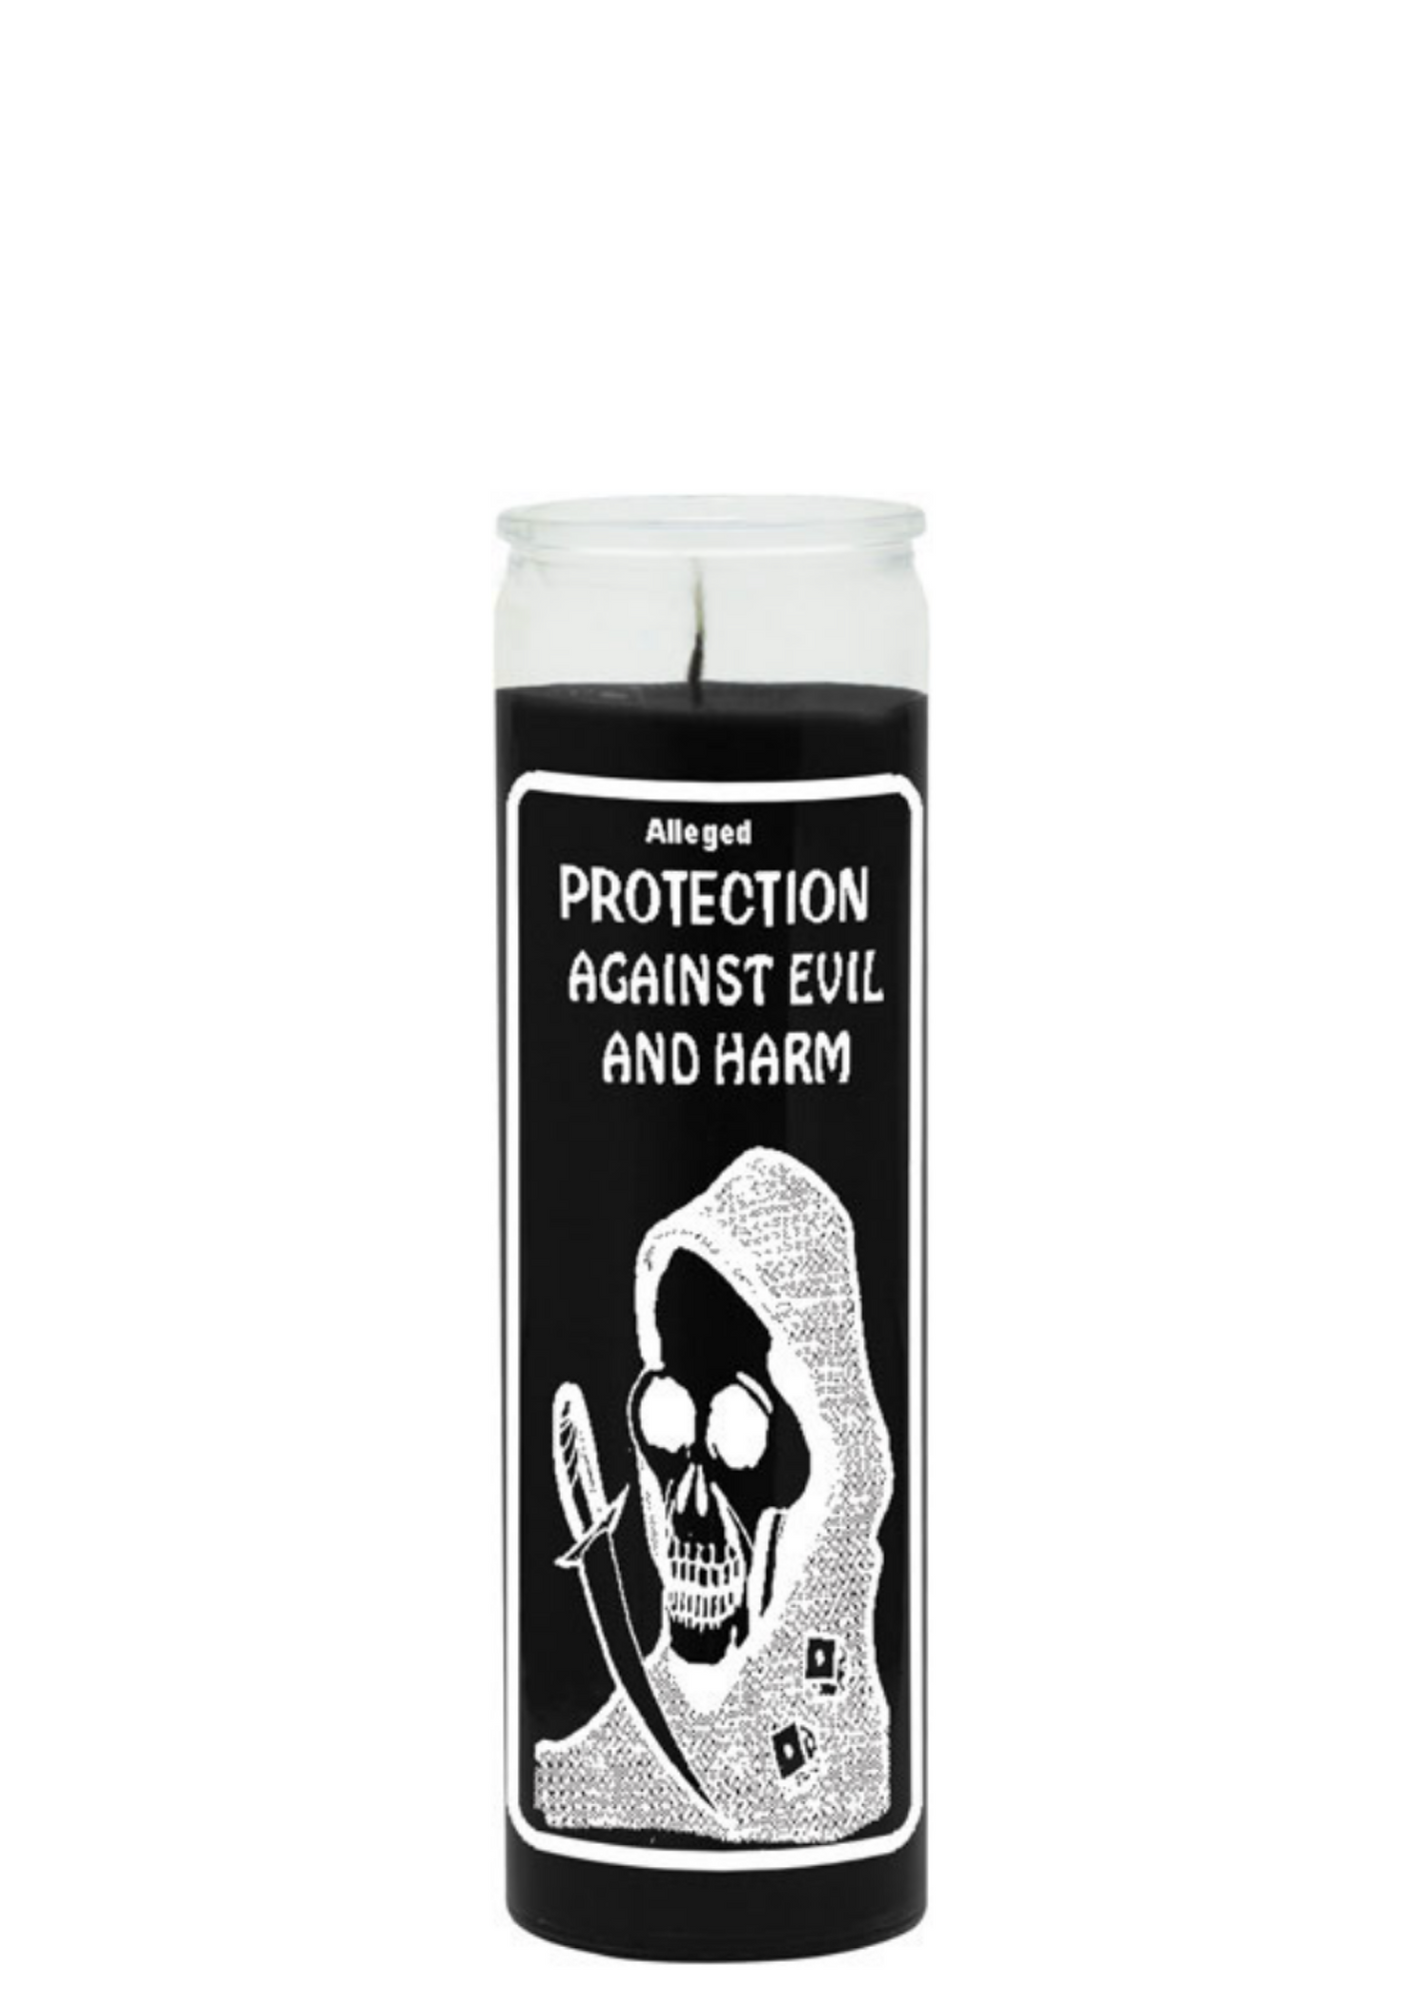 PROTECTION FROM EVIL (White) 1 COLOR 7 DAY CANDLE